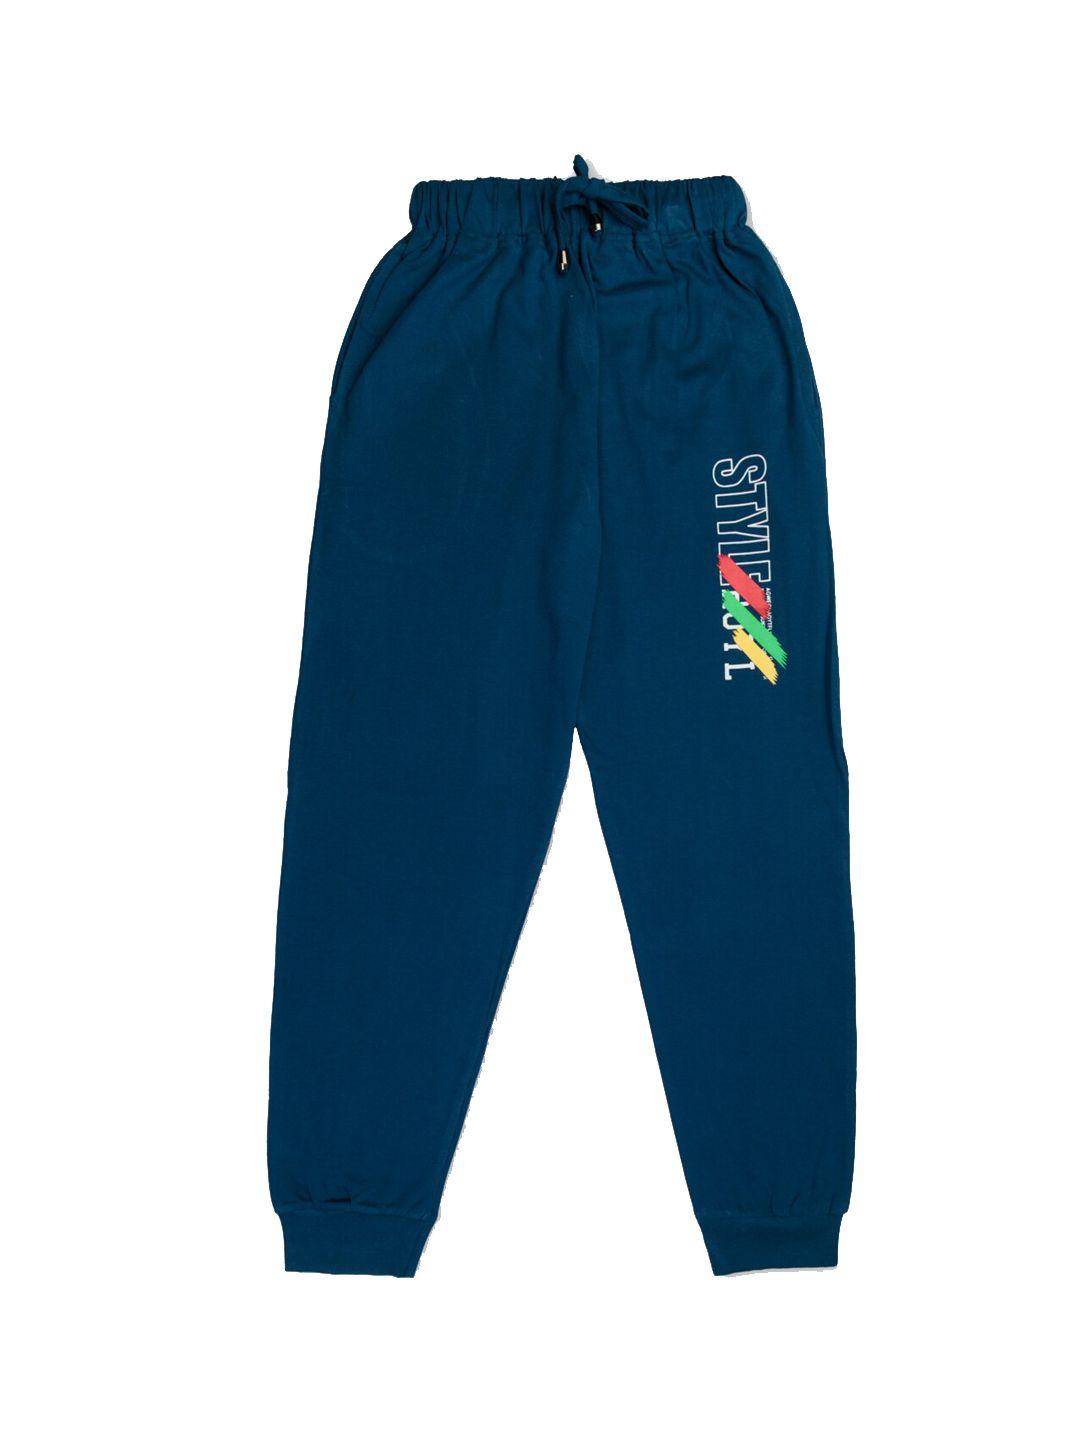 todd-n-teen-boys-blue-solid-cotton-joggers